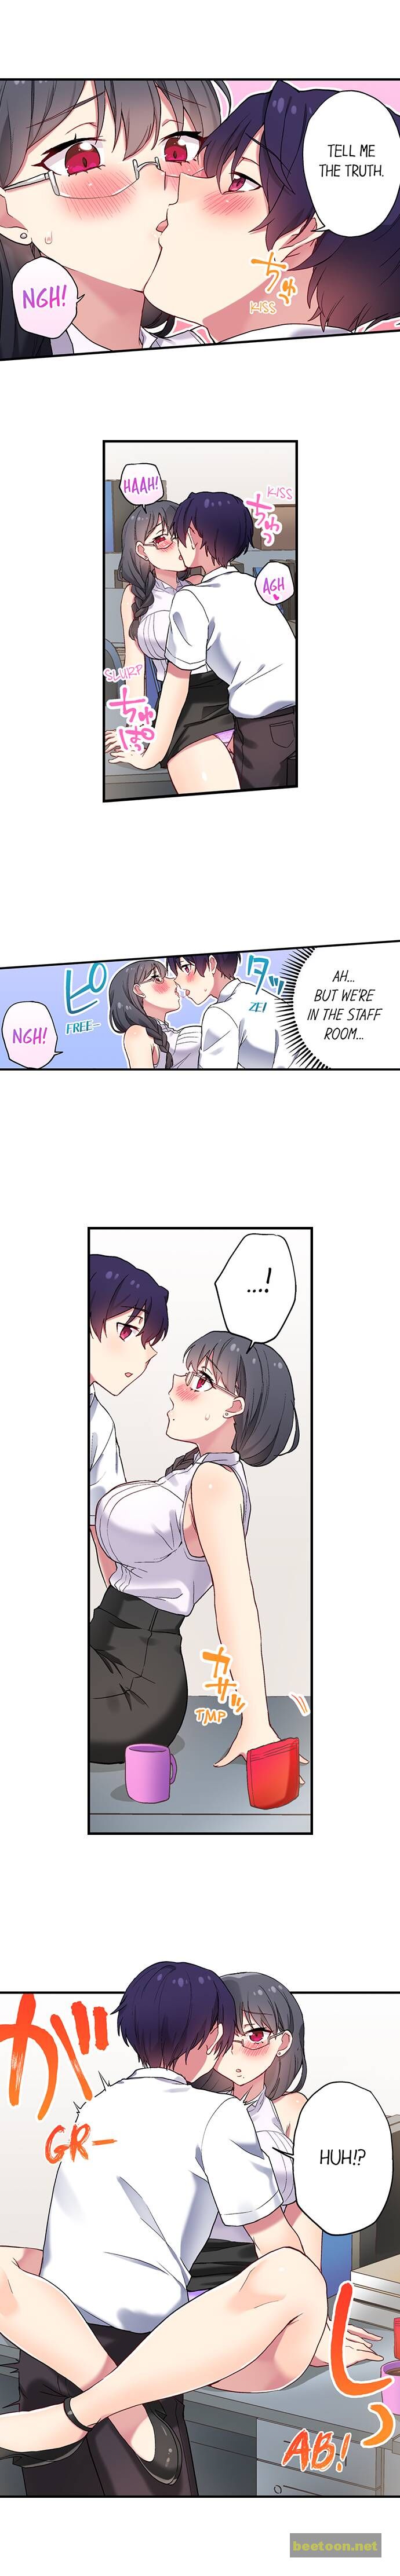 I Can See The Number Of Times People Orgasm Chapter 110 - MyToon.net